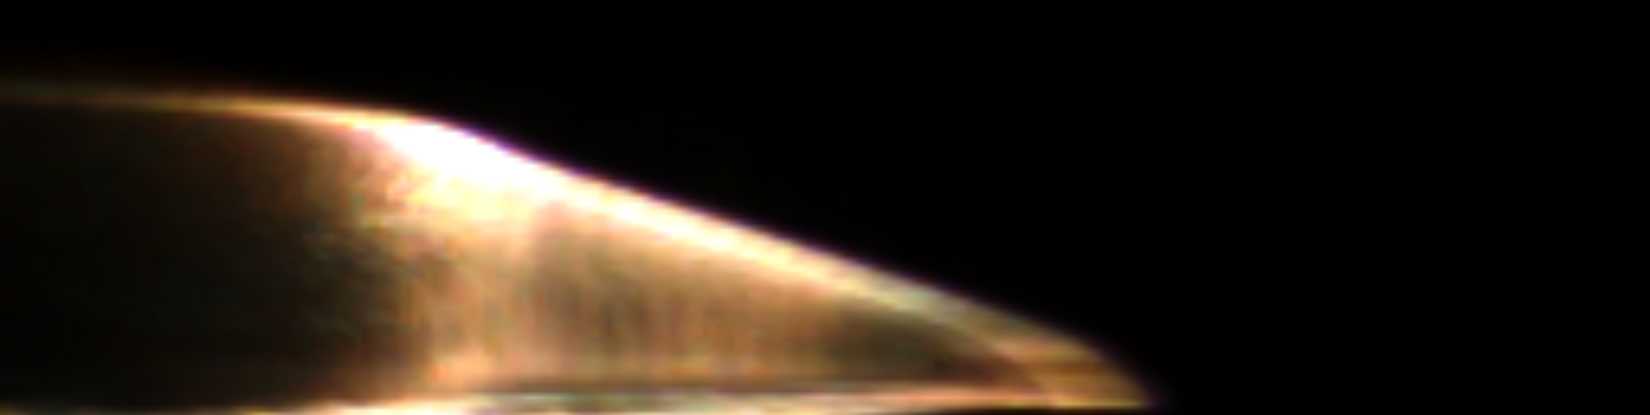 Conical flight body launched from a two-stage light gas gun flowing against a black background